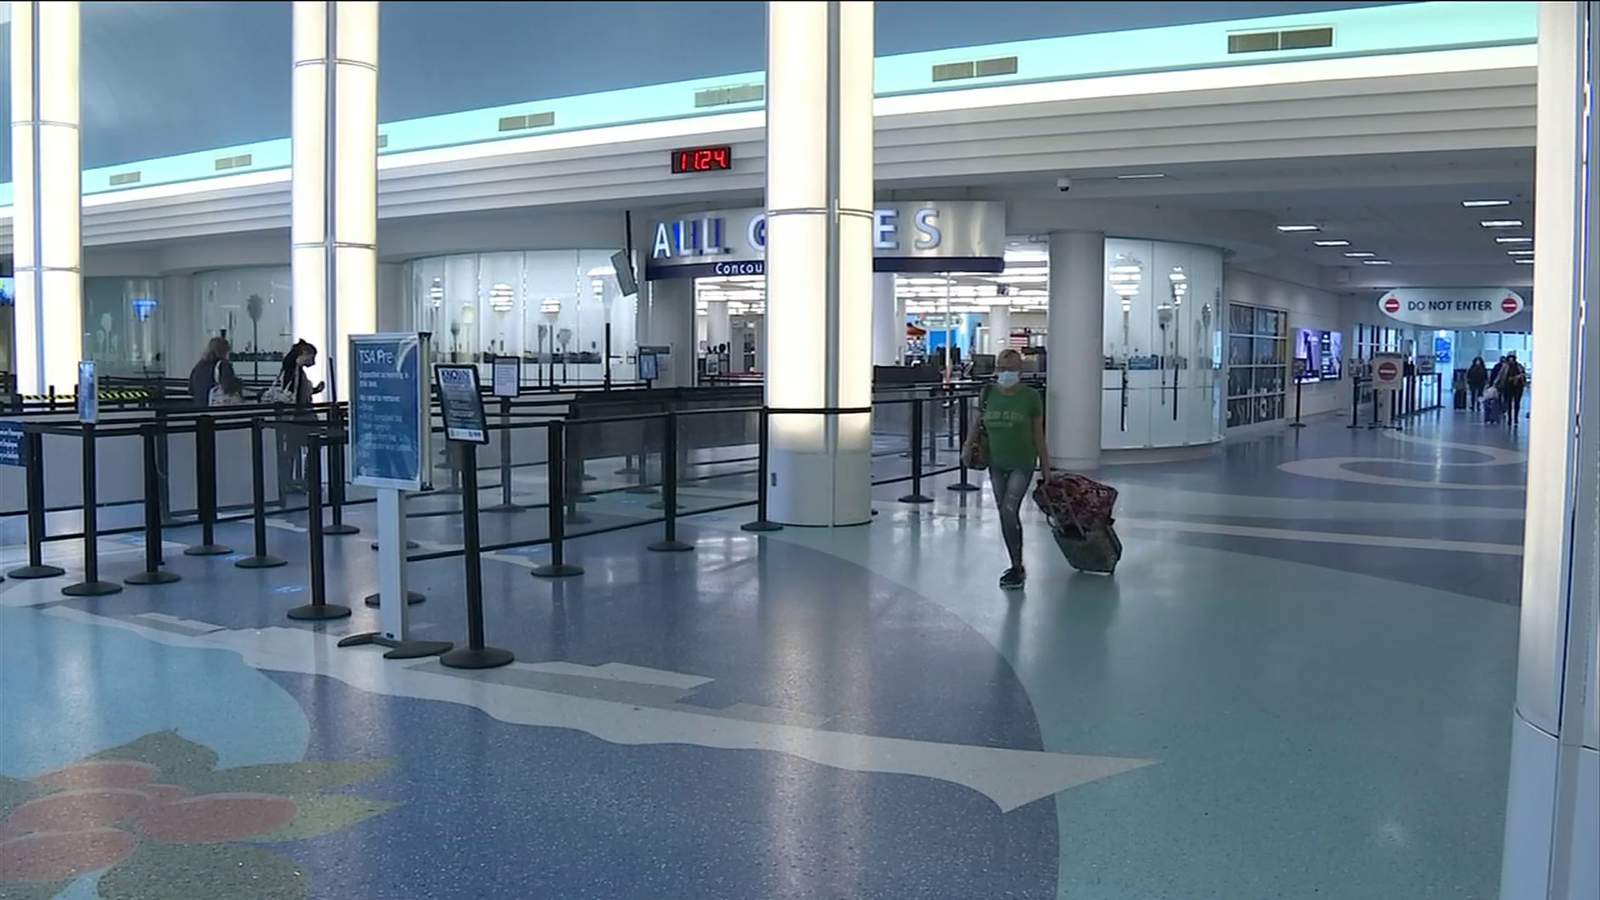 Haven’t been to the airport lately? What you need to know ahead of the holidays